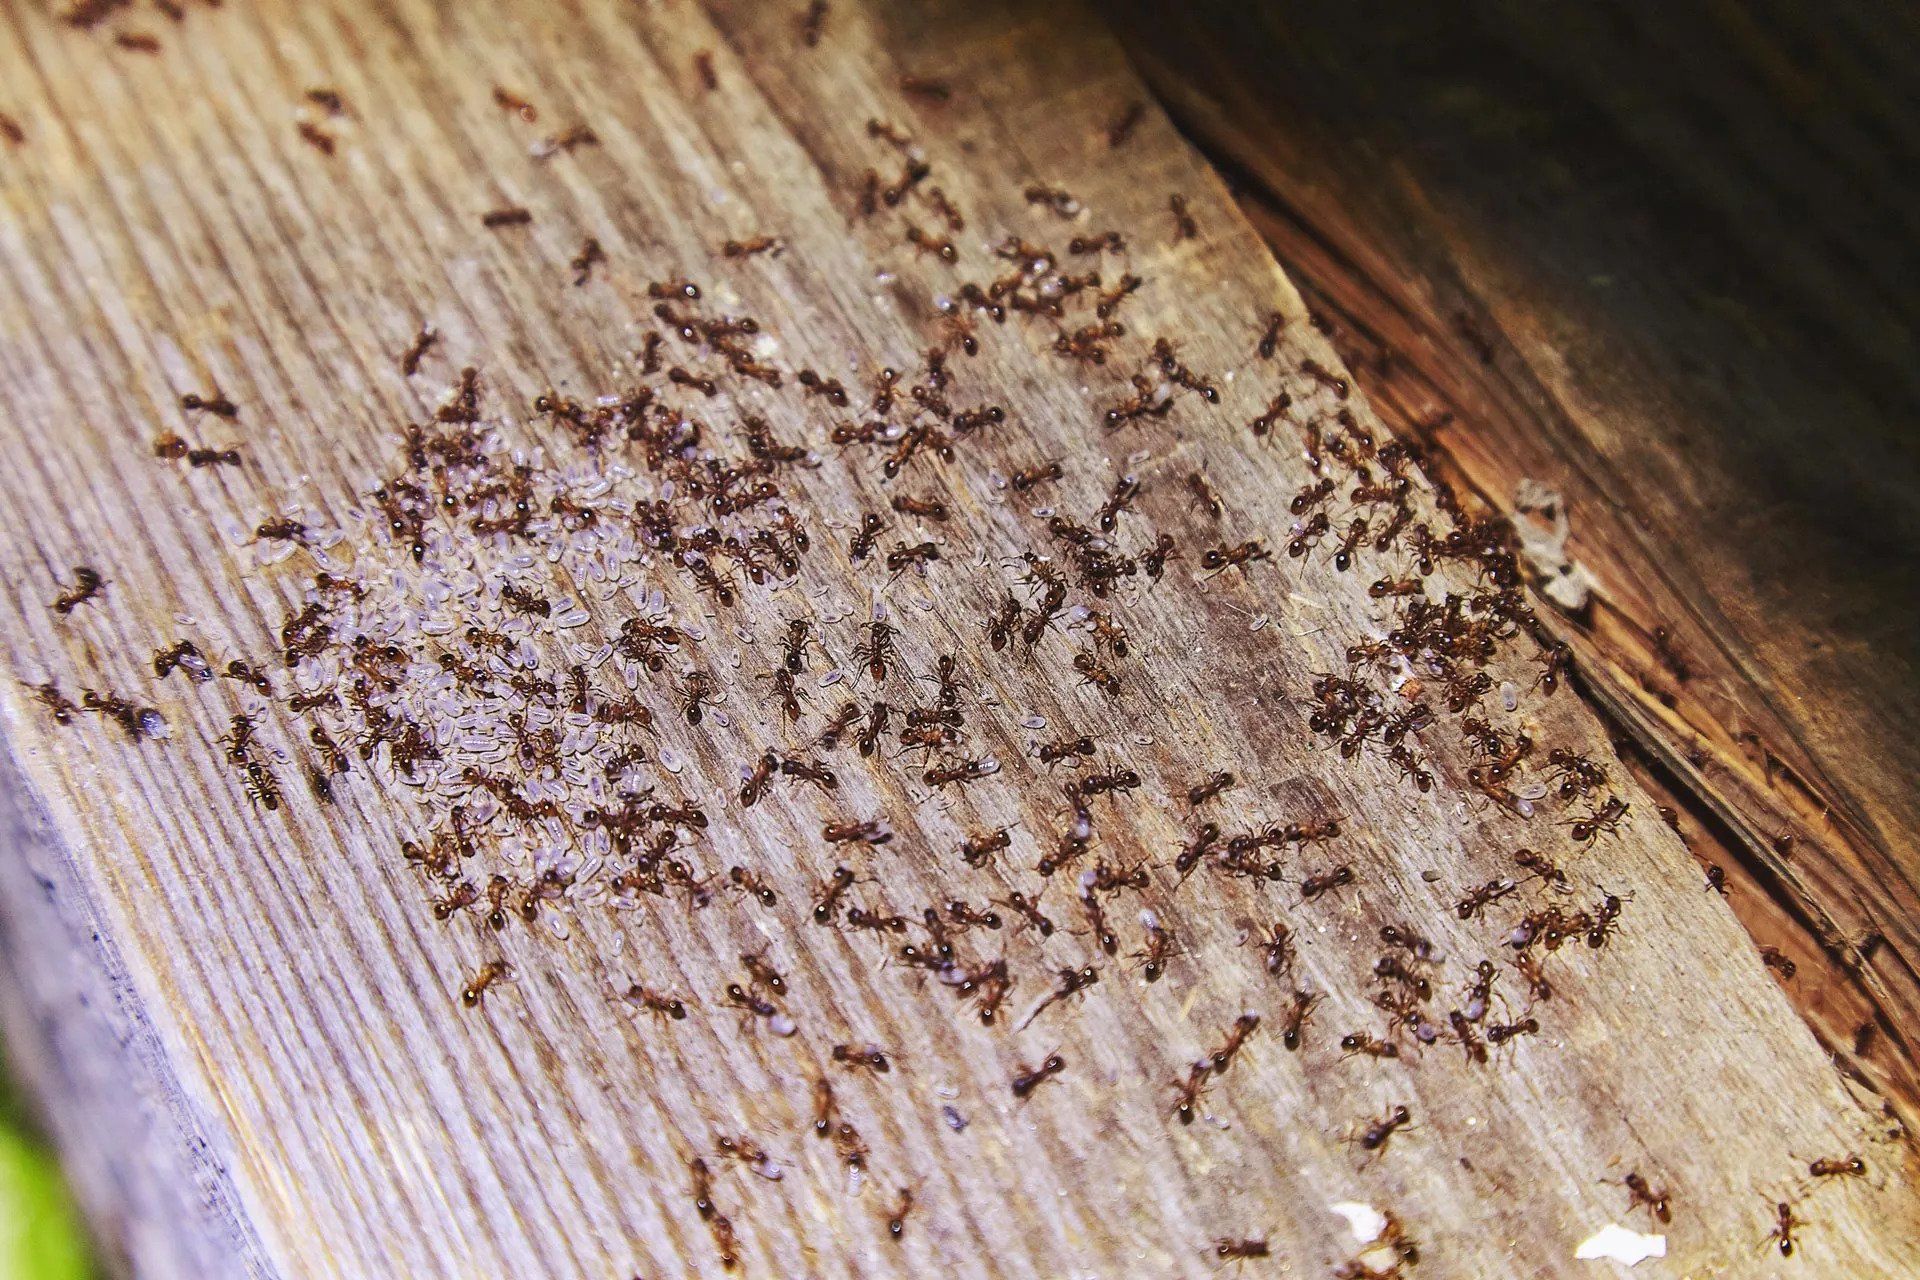 Ants causing structural damage